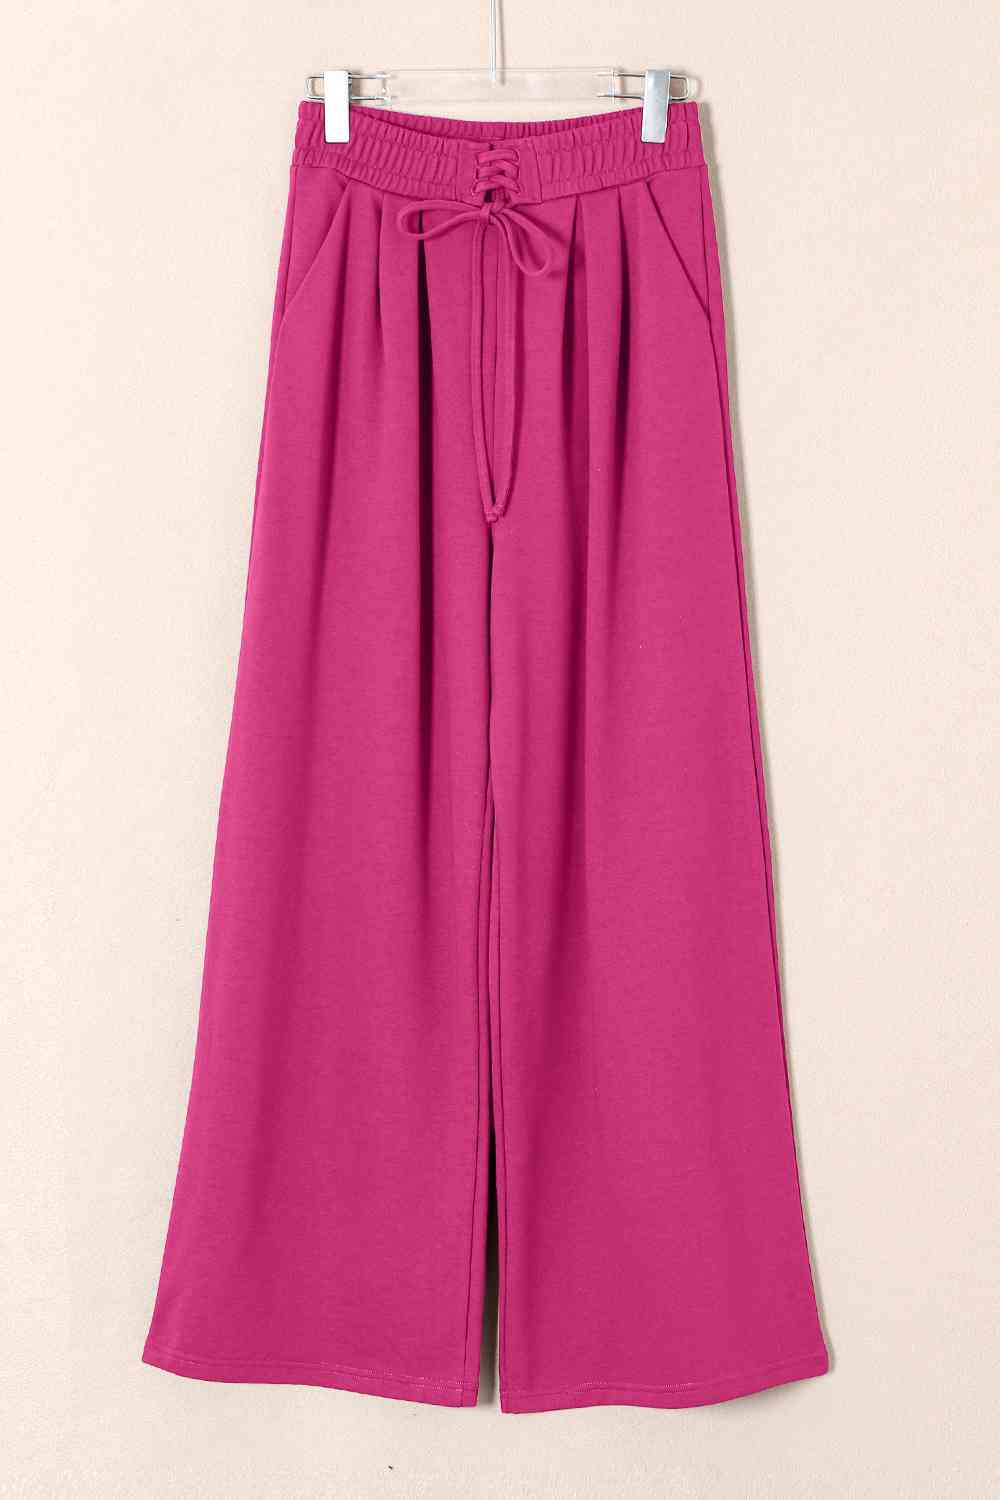 Maroon Lace-Up Wide Leg Pants with Pockets